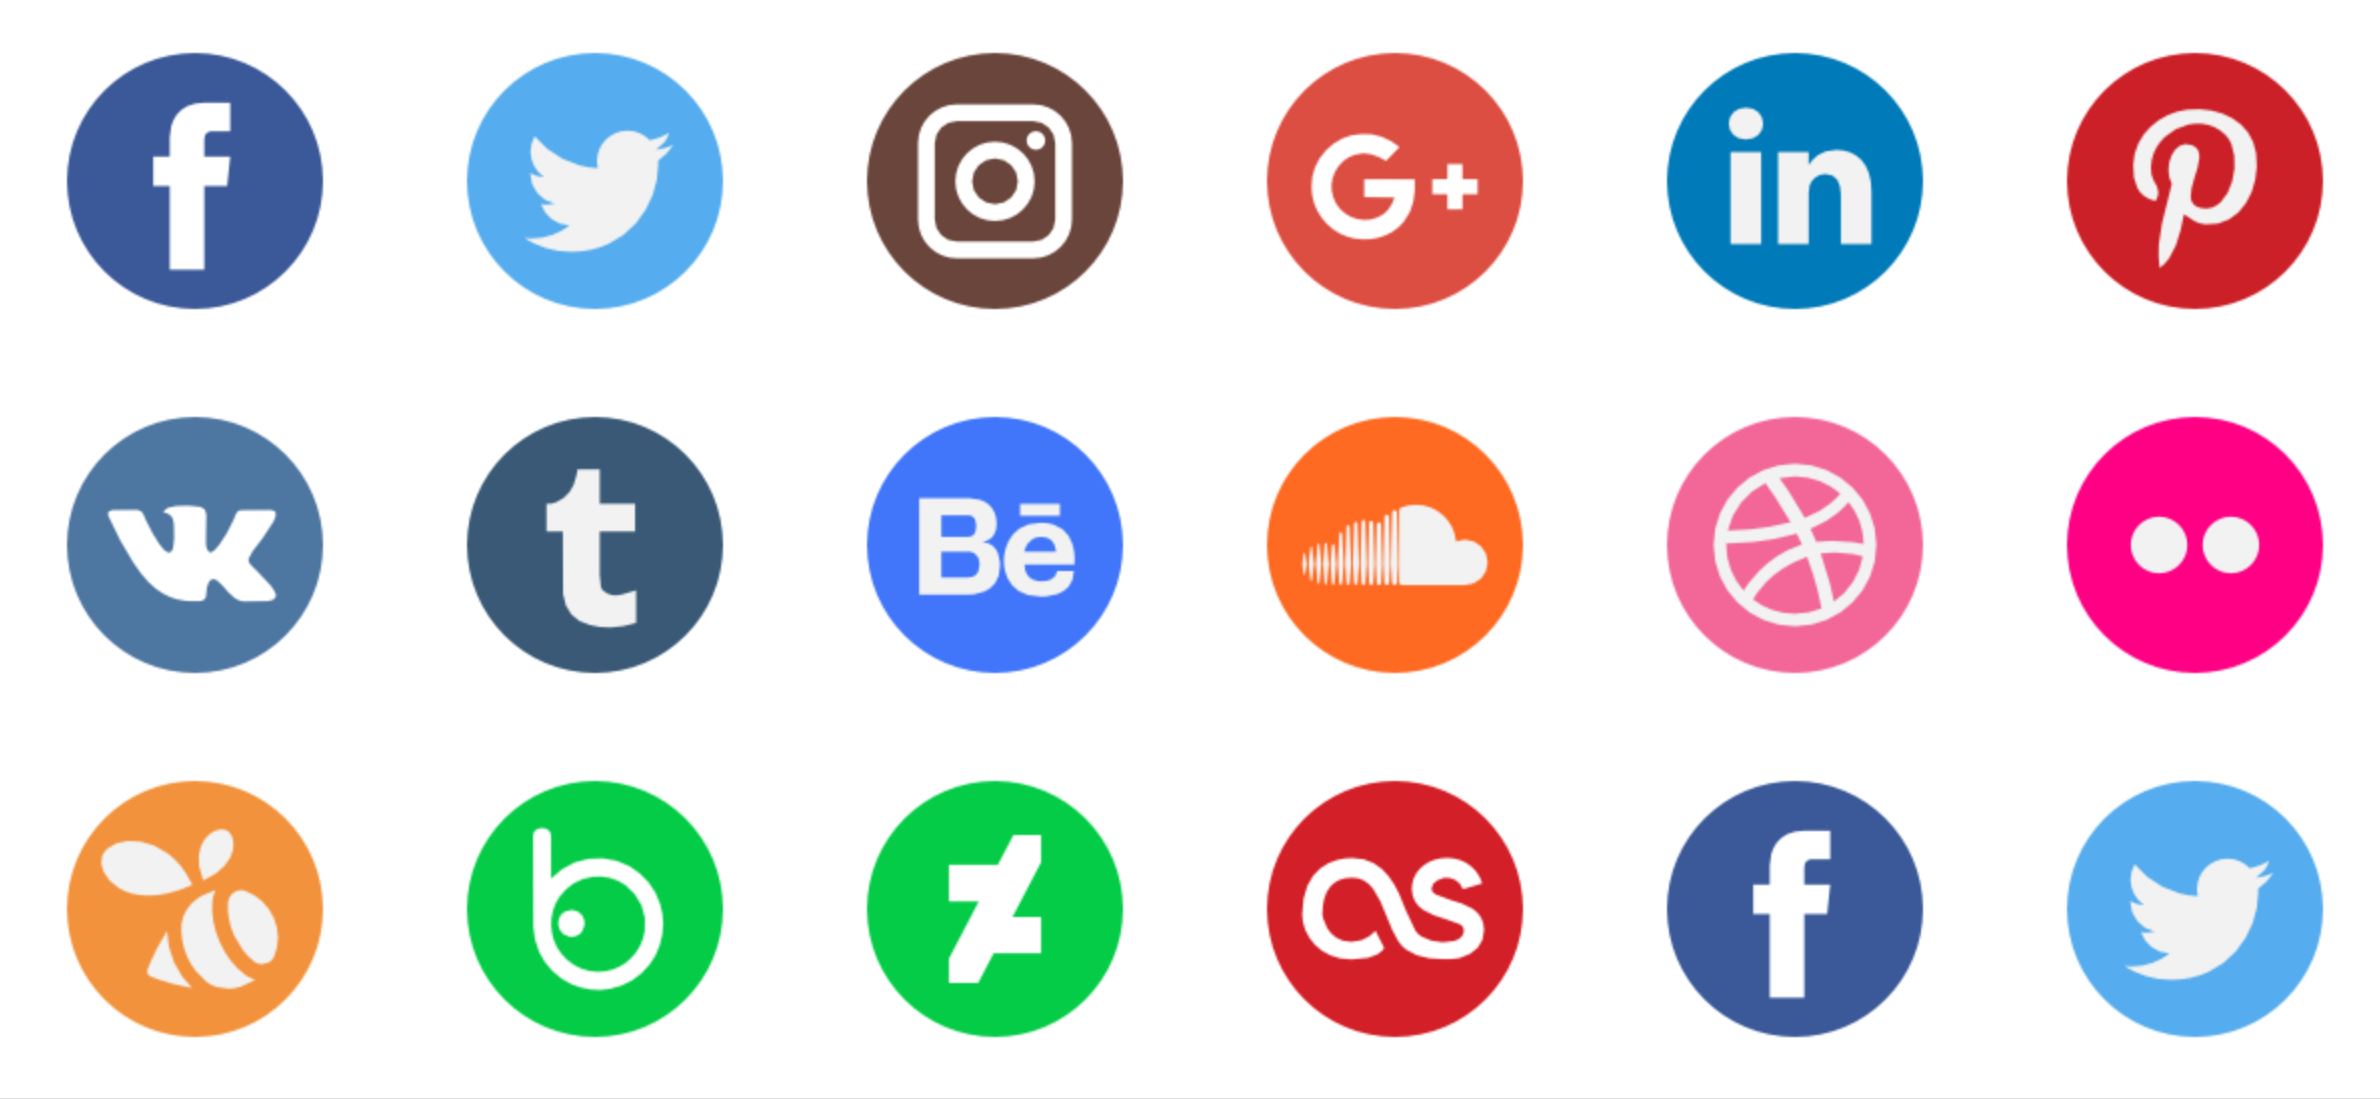 Download 15 Social Network vector icons (eps + svg) for free download